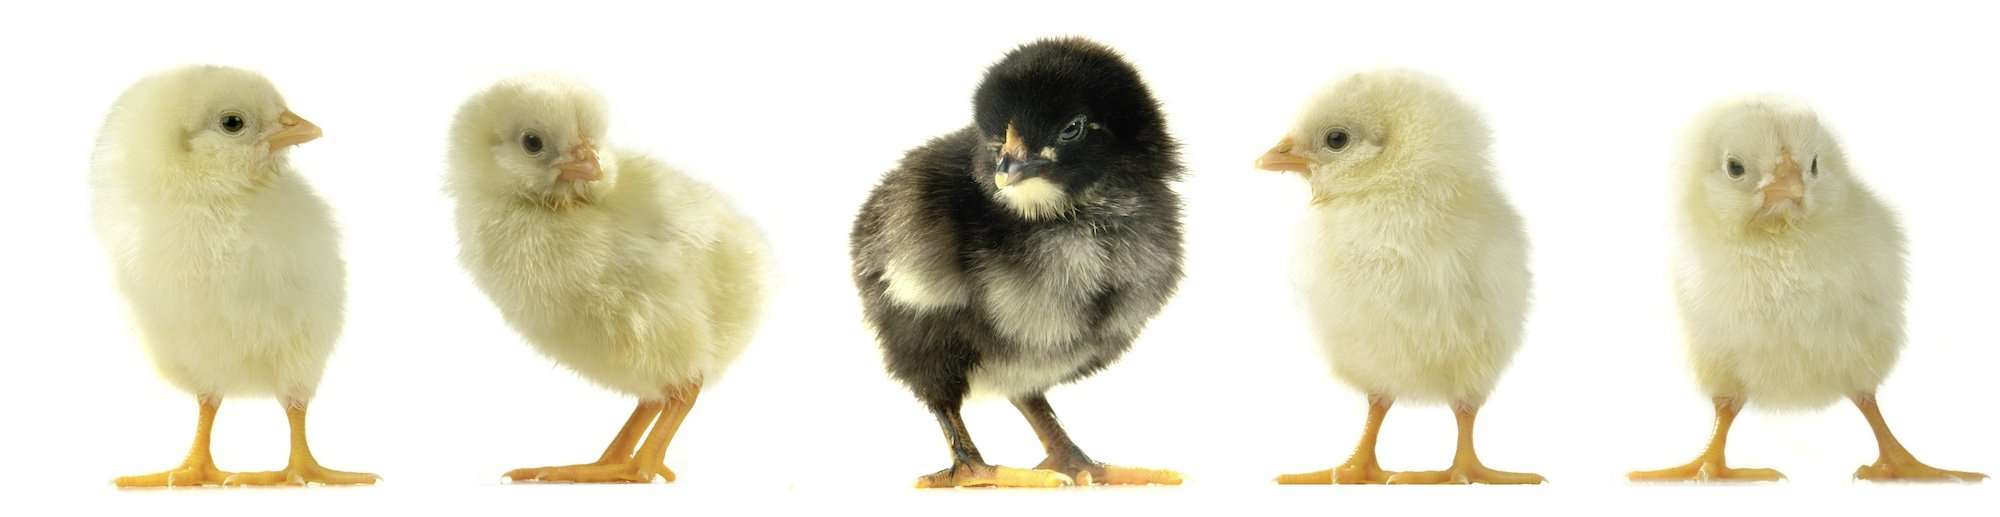 5 day old chicks in a row on a white background.